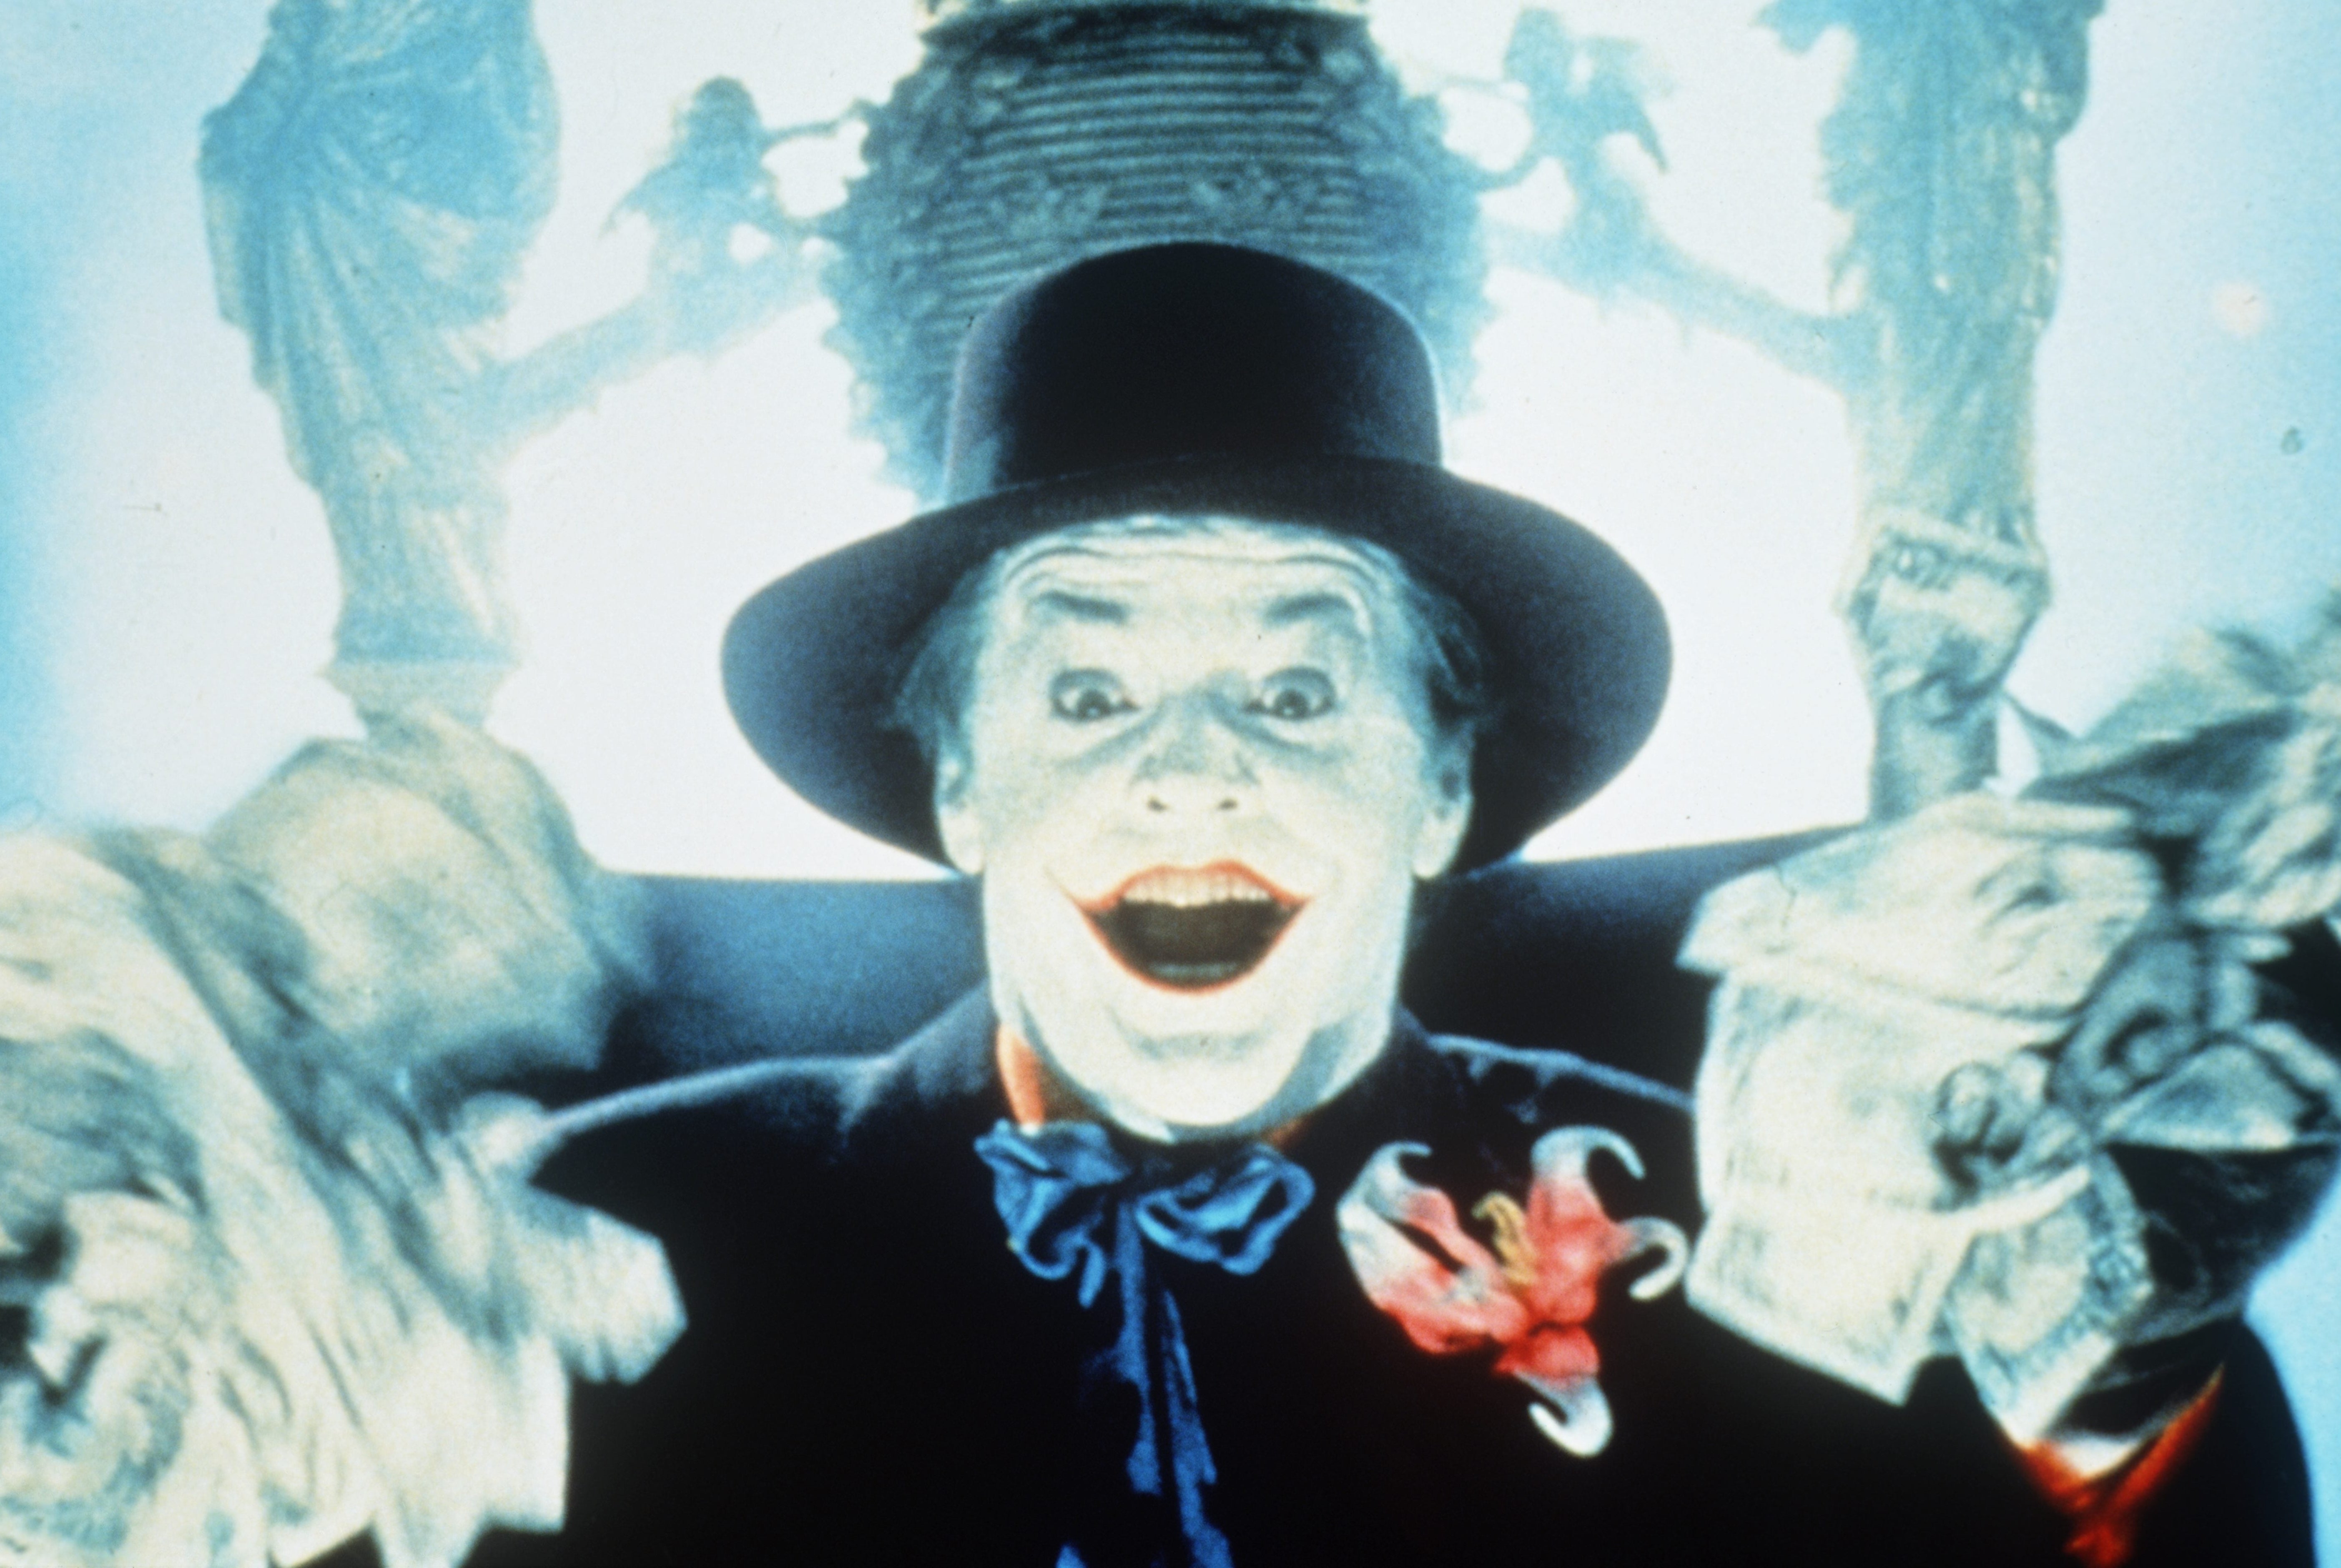 Jack Nicholson as the Joker in Burton’s 1989 iteration of the franchise